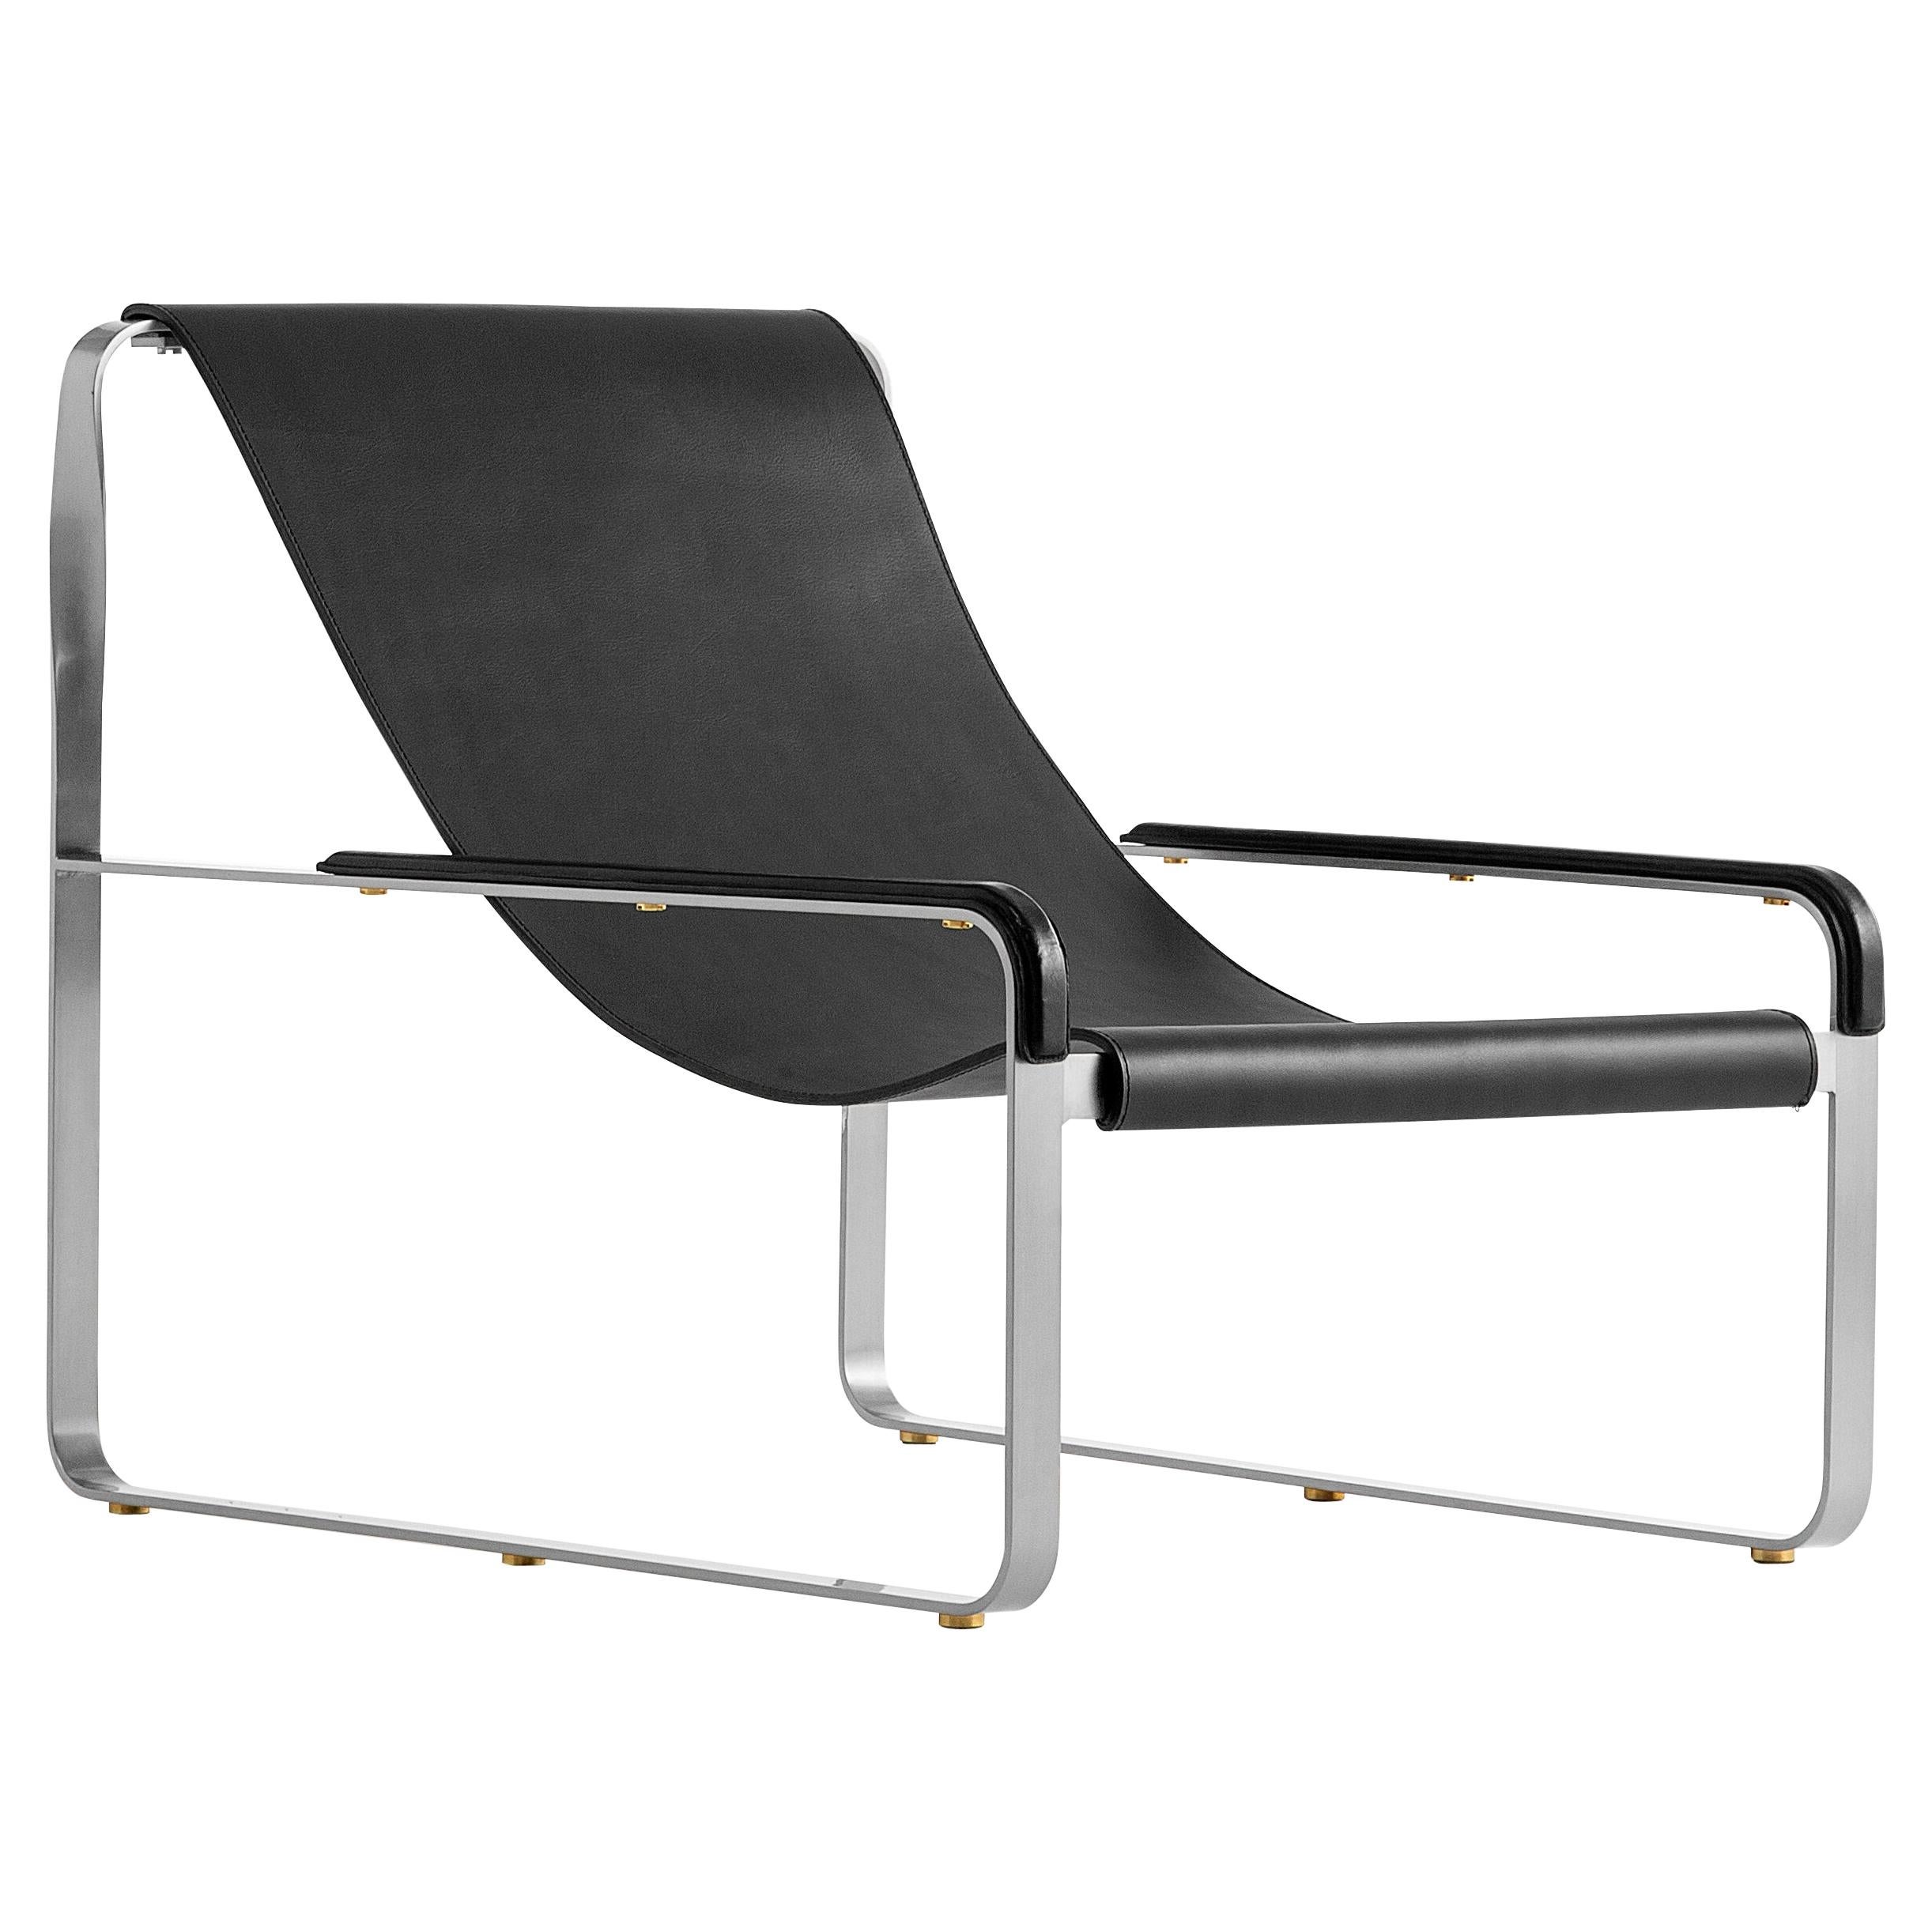 Artisan Contemporary Chaise Lounge Old Silver Steel & Black Leather